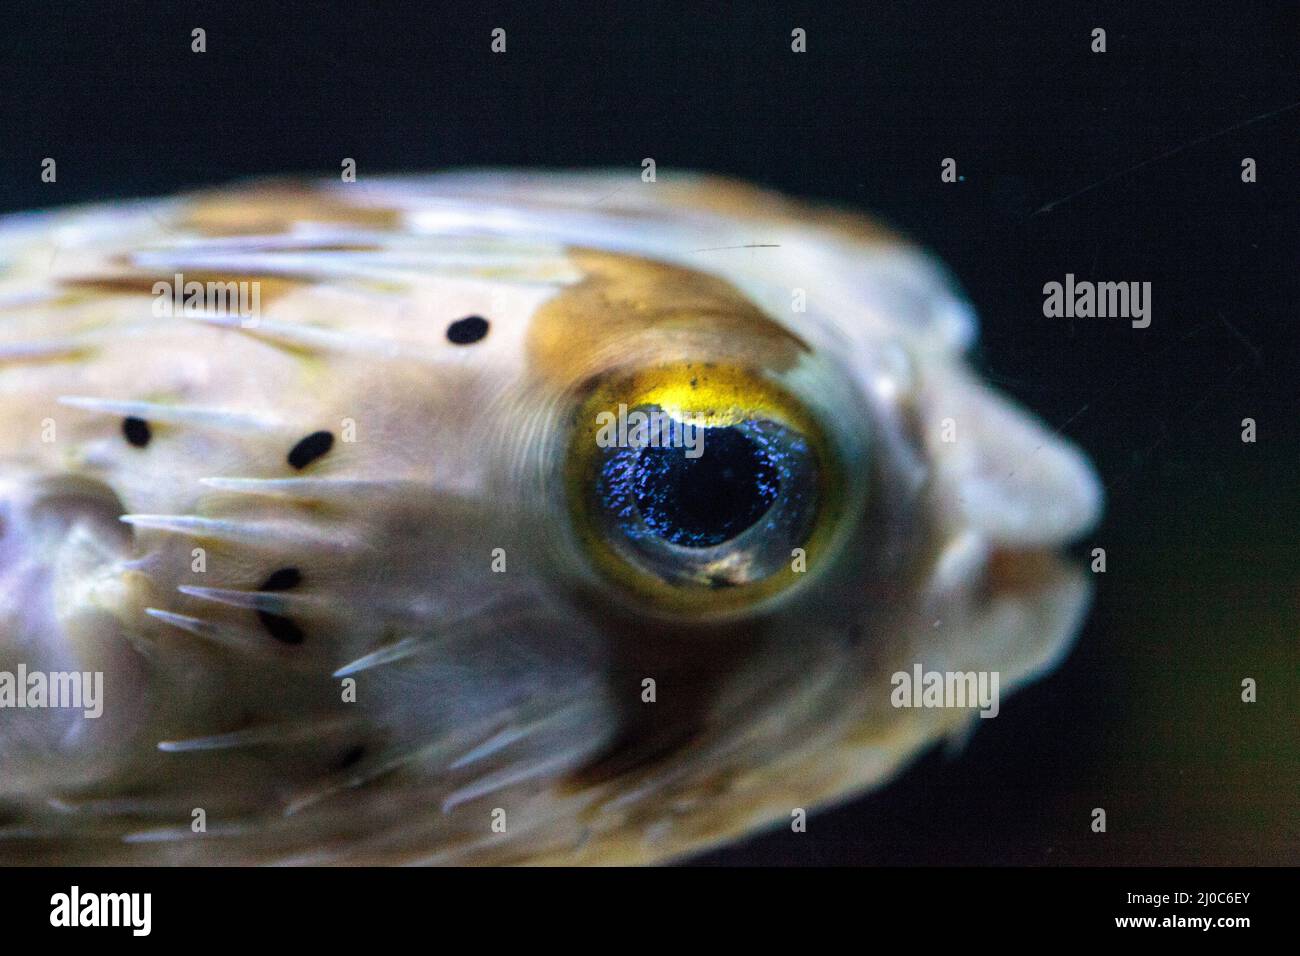 Spiny porcupinefish Diodon holocanthus has eyes that sparkle with blue flecks Stock Photo